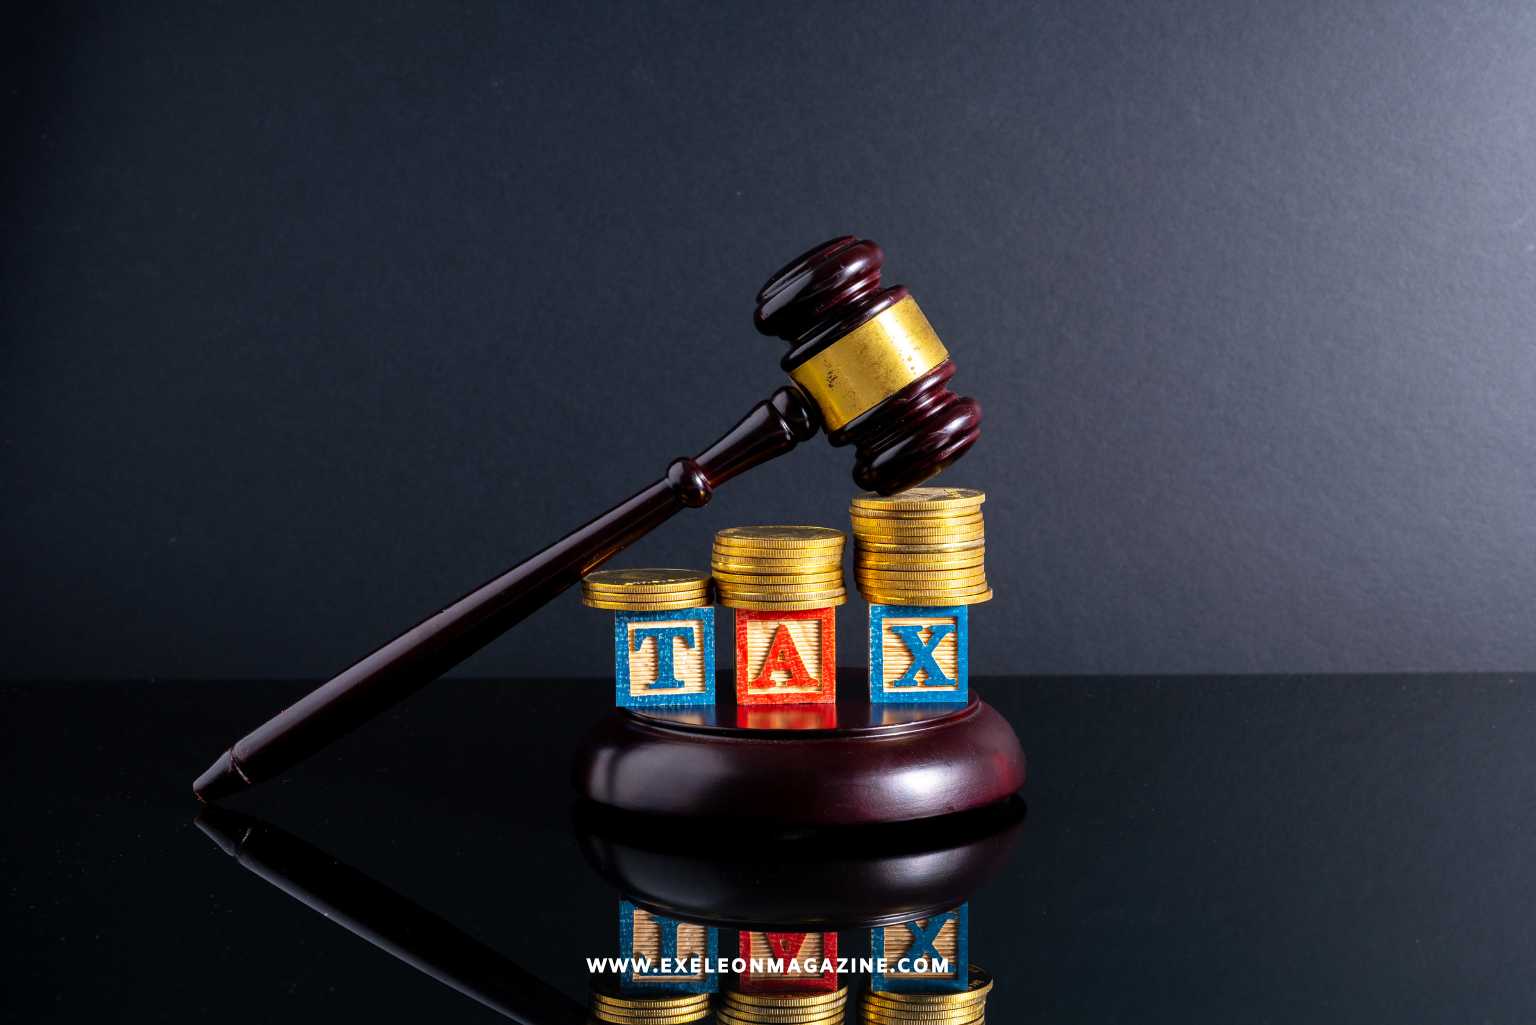 Tax Resolution with a hammer image